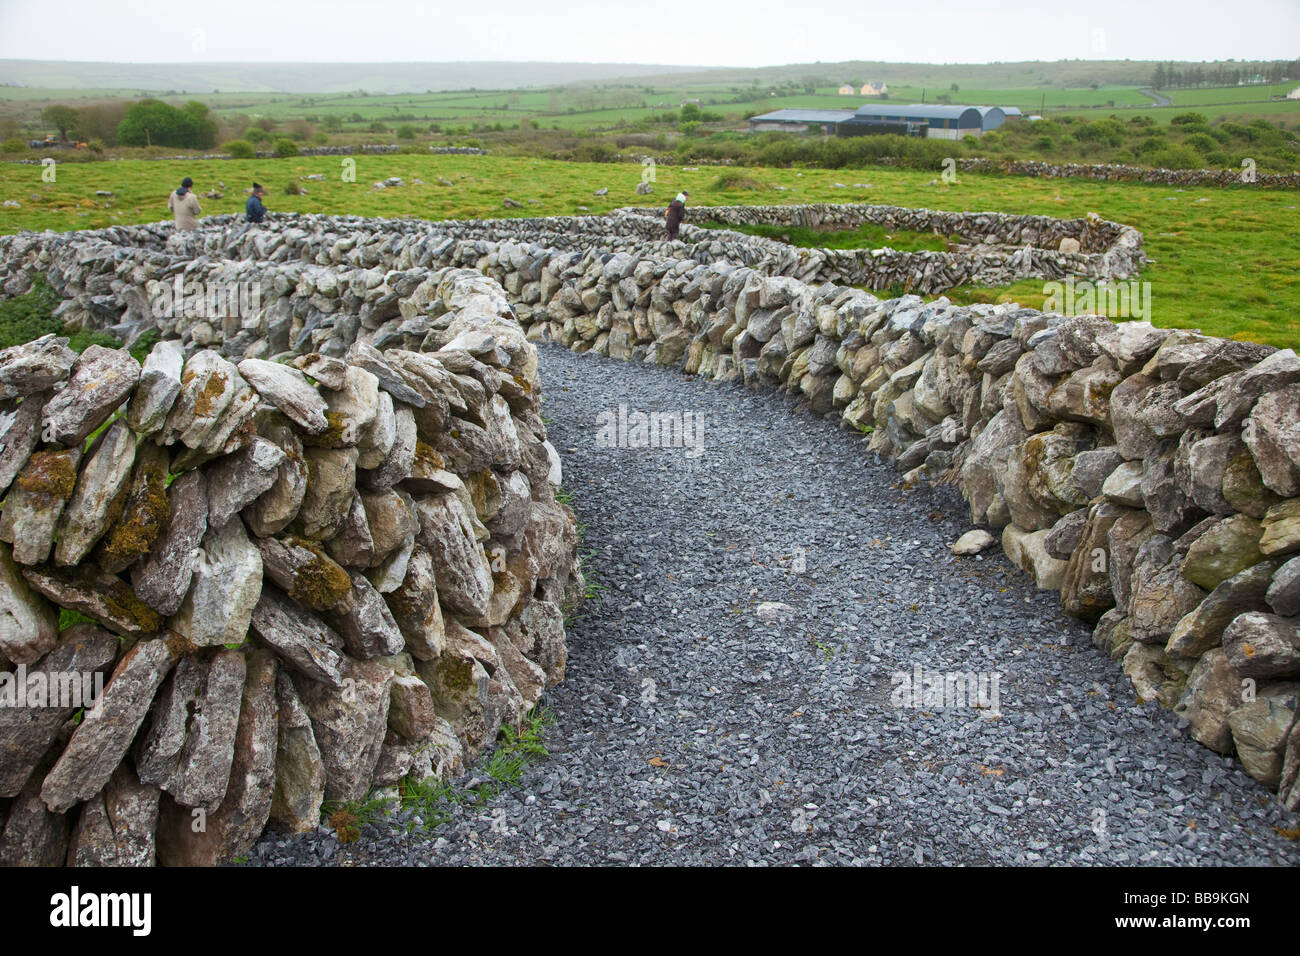 Caherconnell Celtic Ring Fort stone walls Clarens Burren County Clare Ireland Eire Irish Republic Europe EU Stock Photo